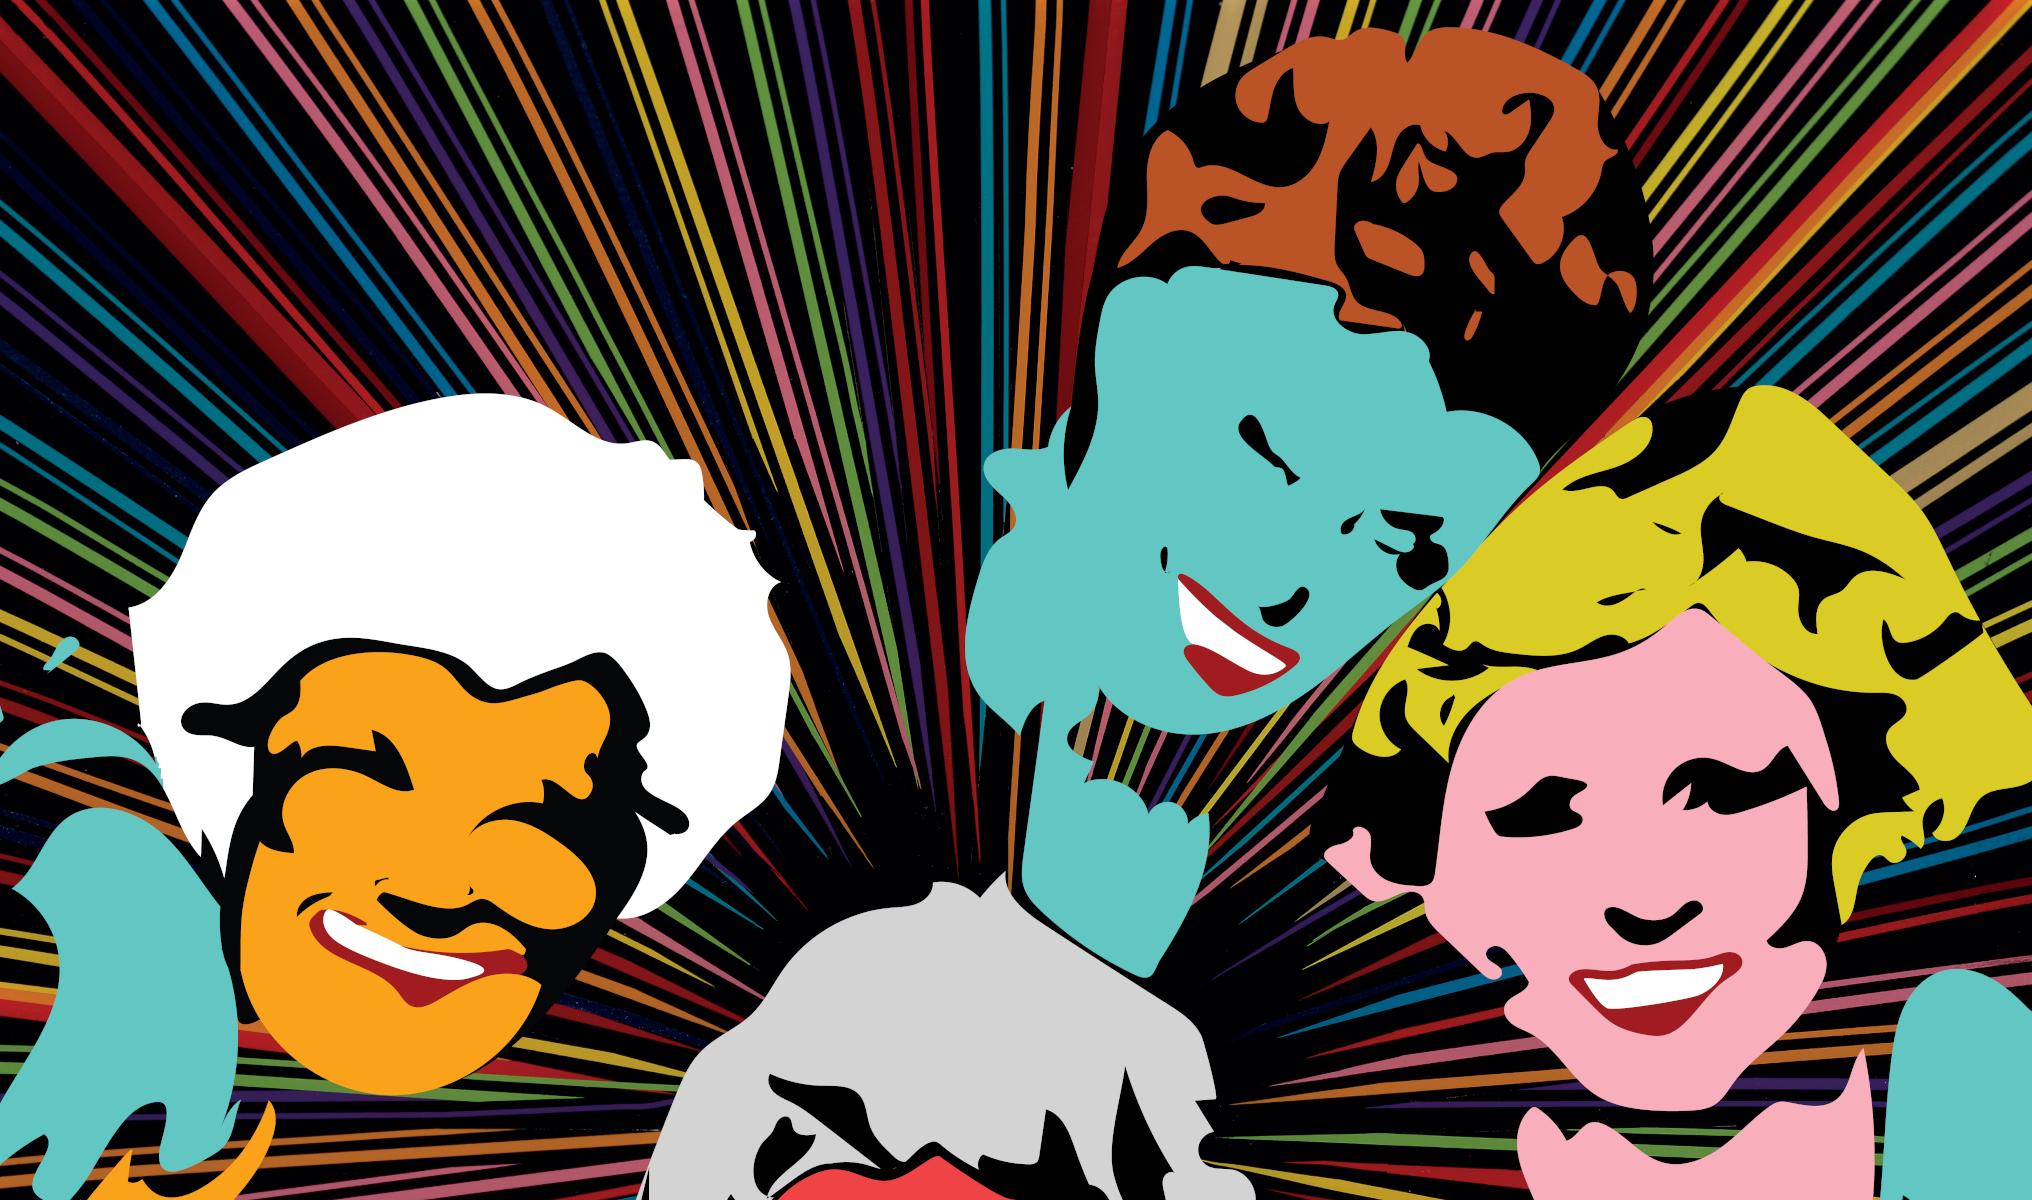               **ANNUAL SUPER SALE UNTIL MAY 15TH ONLY**
*This Price Won't Be Repeated Again This Year - Take Advantage Of It*

Celebrating the beloved GOLDEN GIRLS on this pop art that only Oliveira can make and think of.

**IMPORTANT: This is a